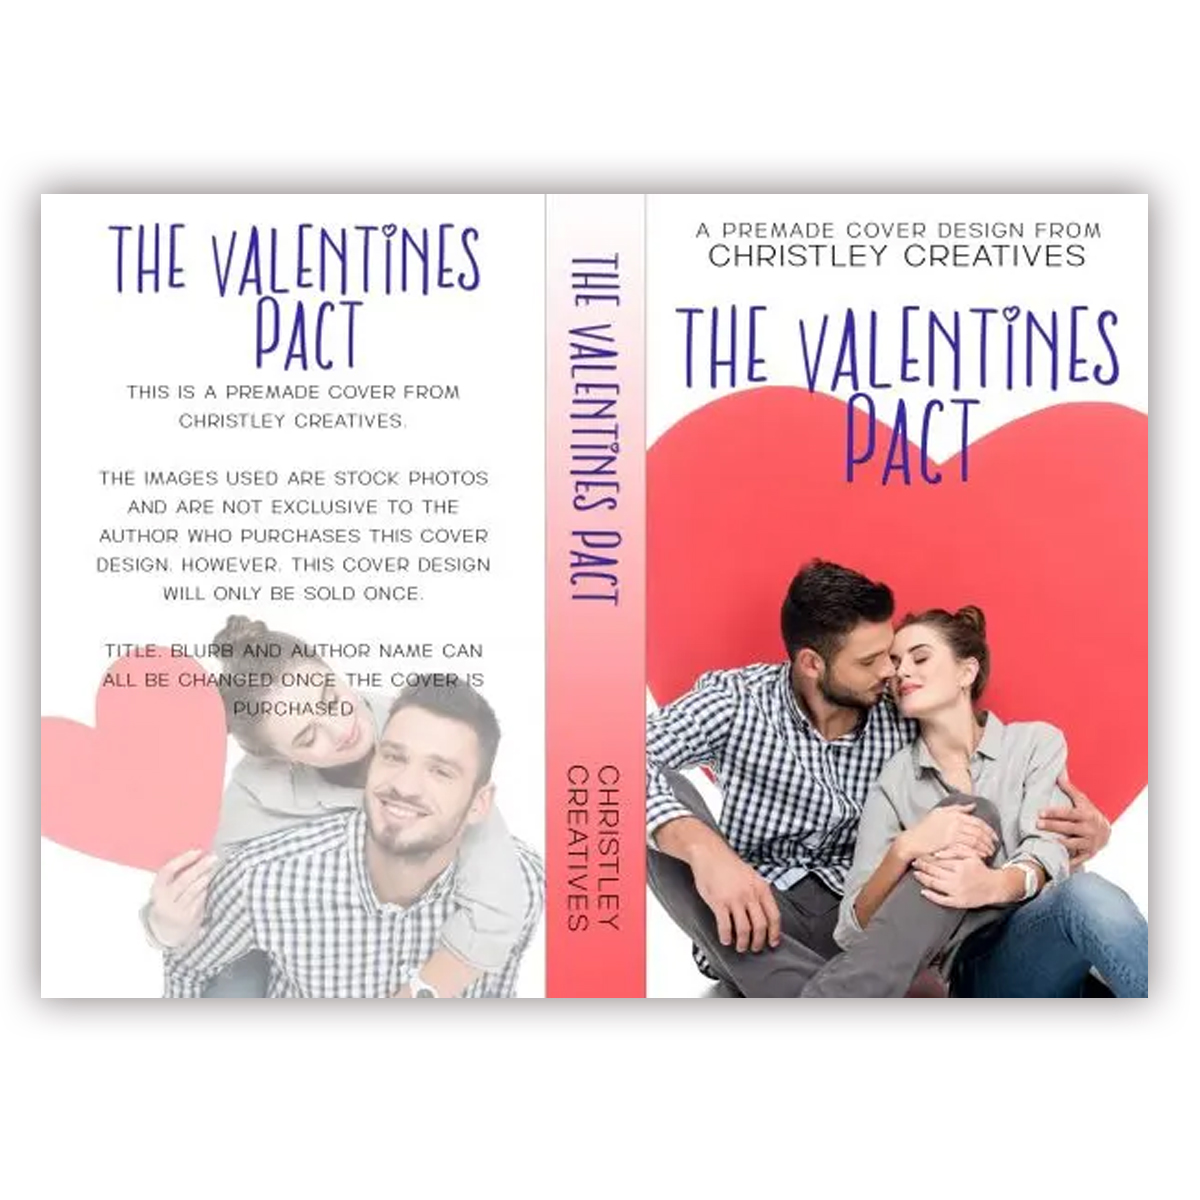 The Valentines Pact - Premade Contemporary Romance Book Cover from Christley Creatives